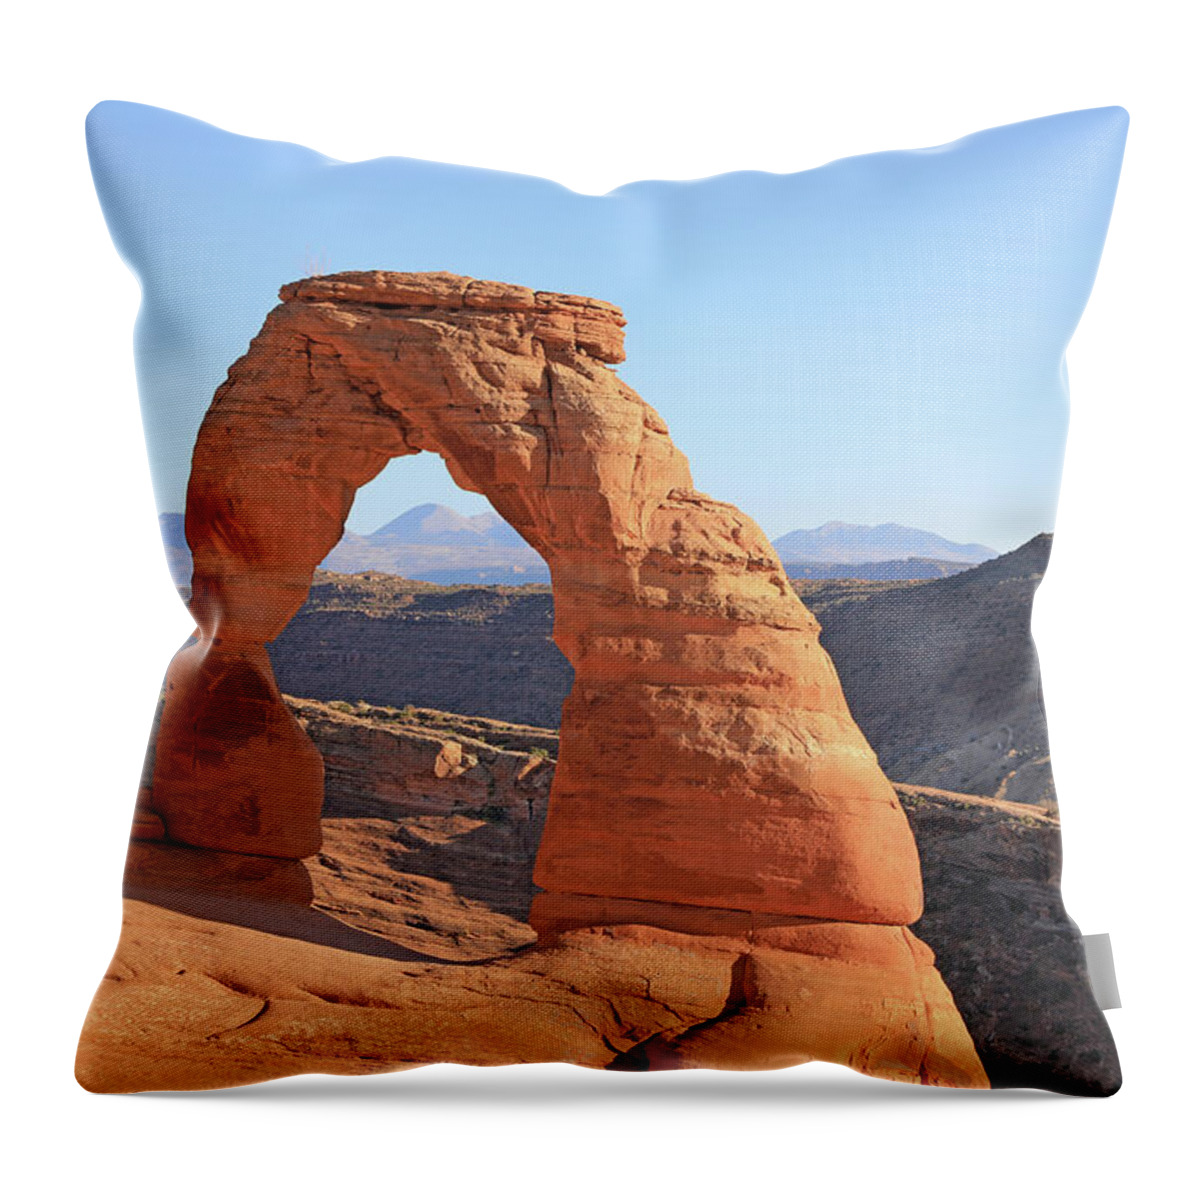 Arches National Park Throw Pillow featuring the photograph Arches National Park - Delicate Arch by Richard Krebs